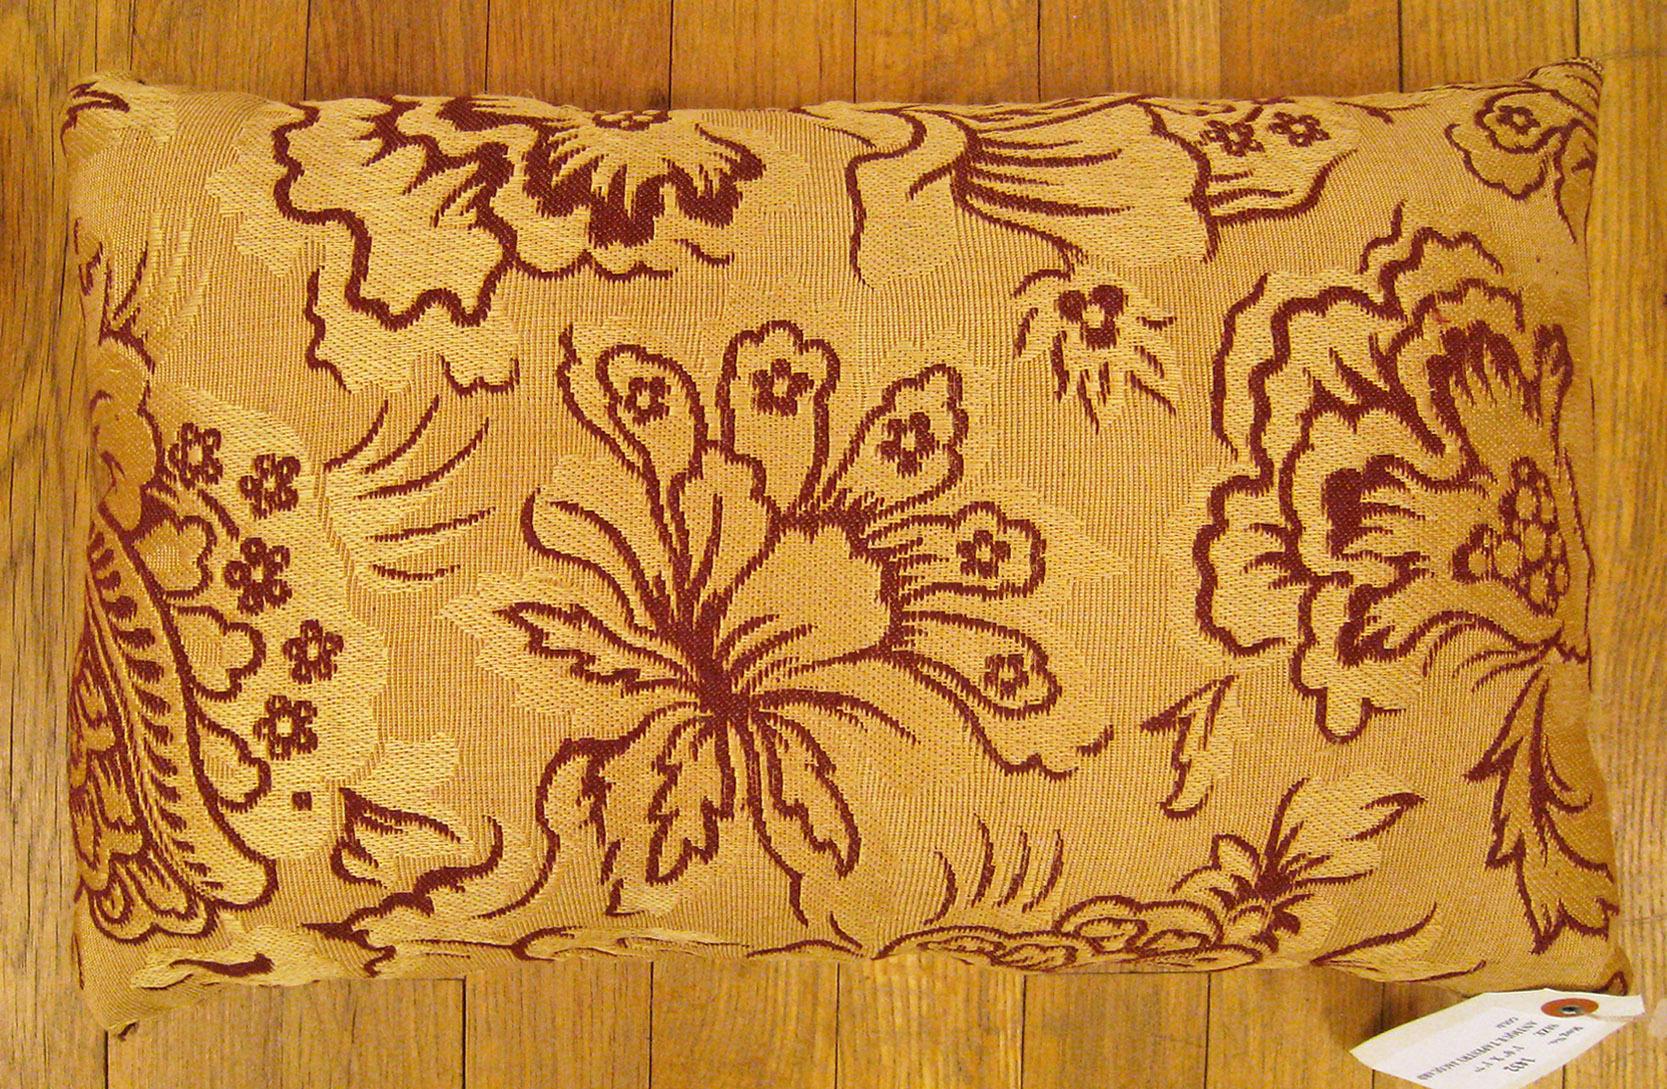 Antique Jacquard Tapestry pillow; size 1'0” x 1'7”. 

An antique decorative pillow with floral elements allover a light gold central field, size 1'0